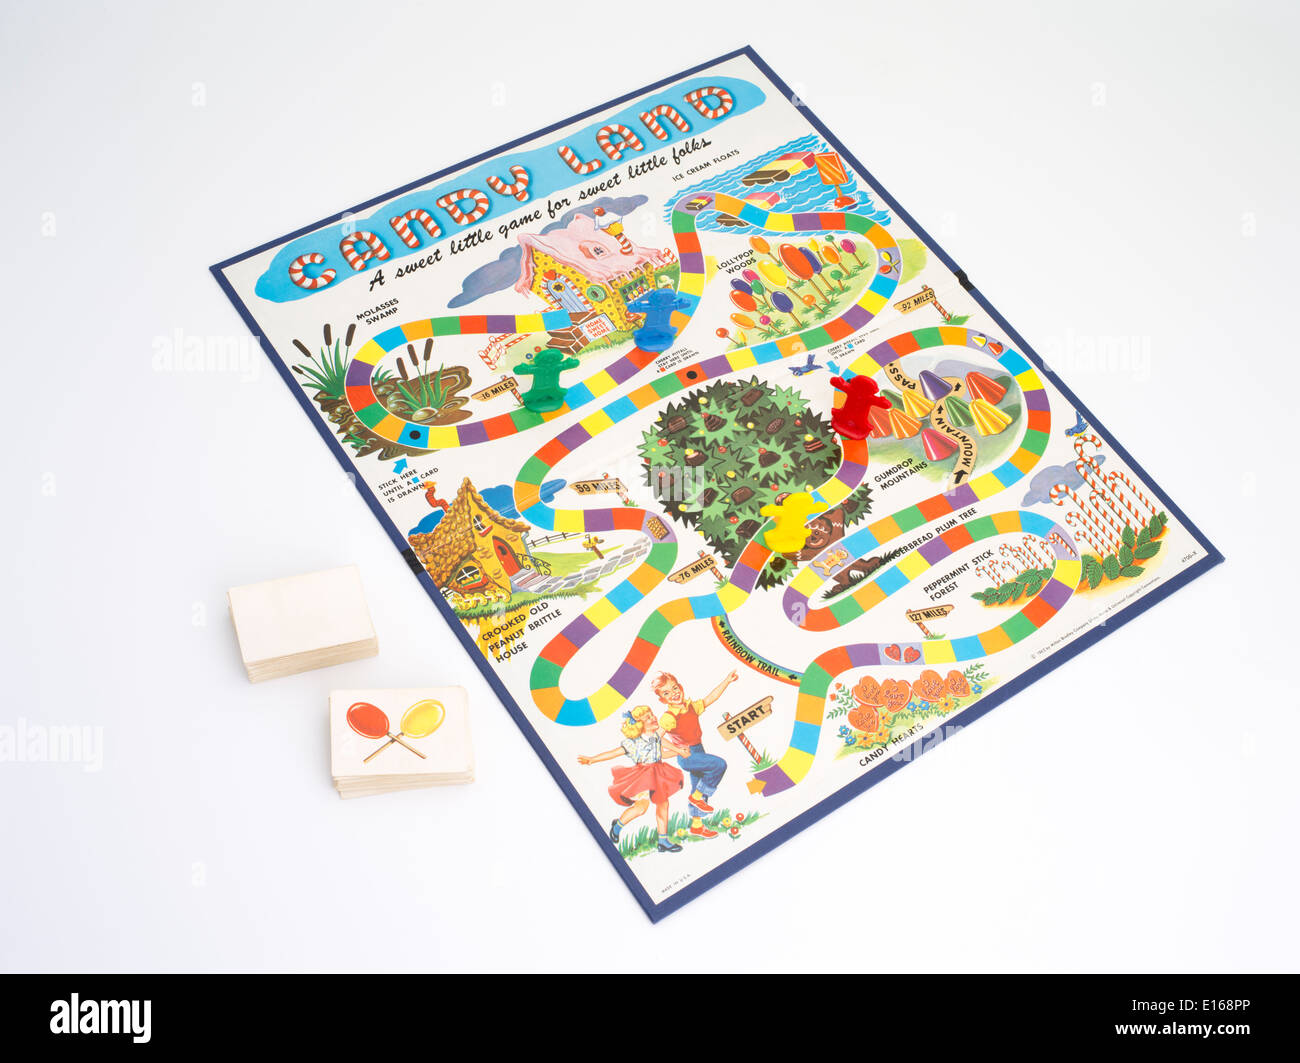 candyland board game layout